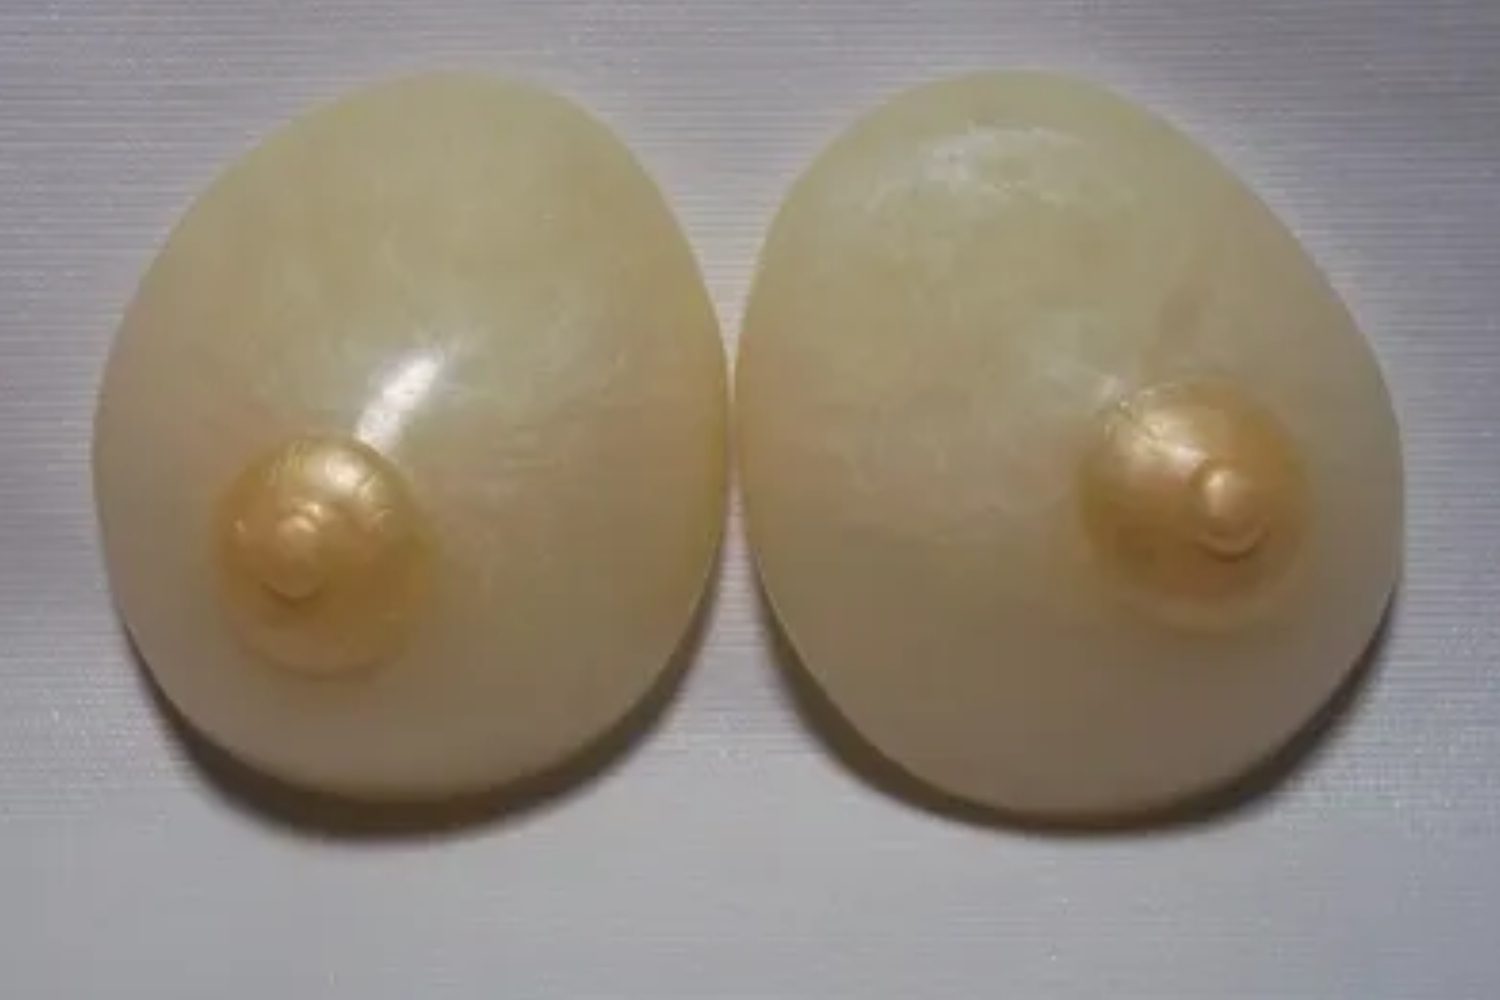 A pair of white buttons with pearls on them.